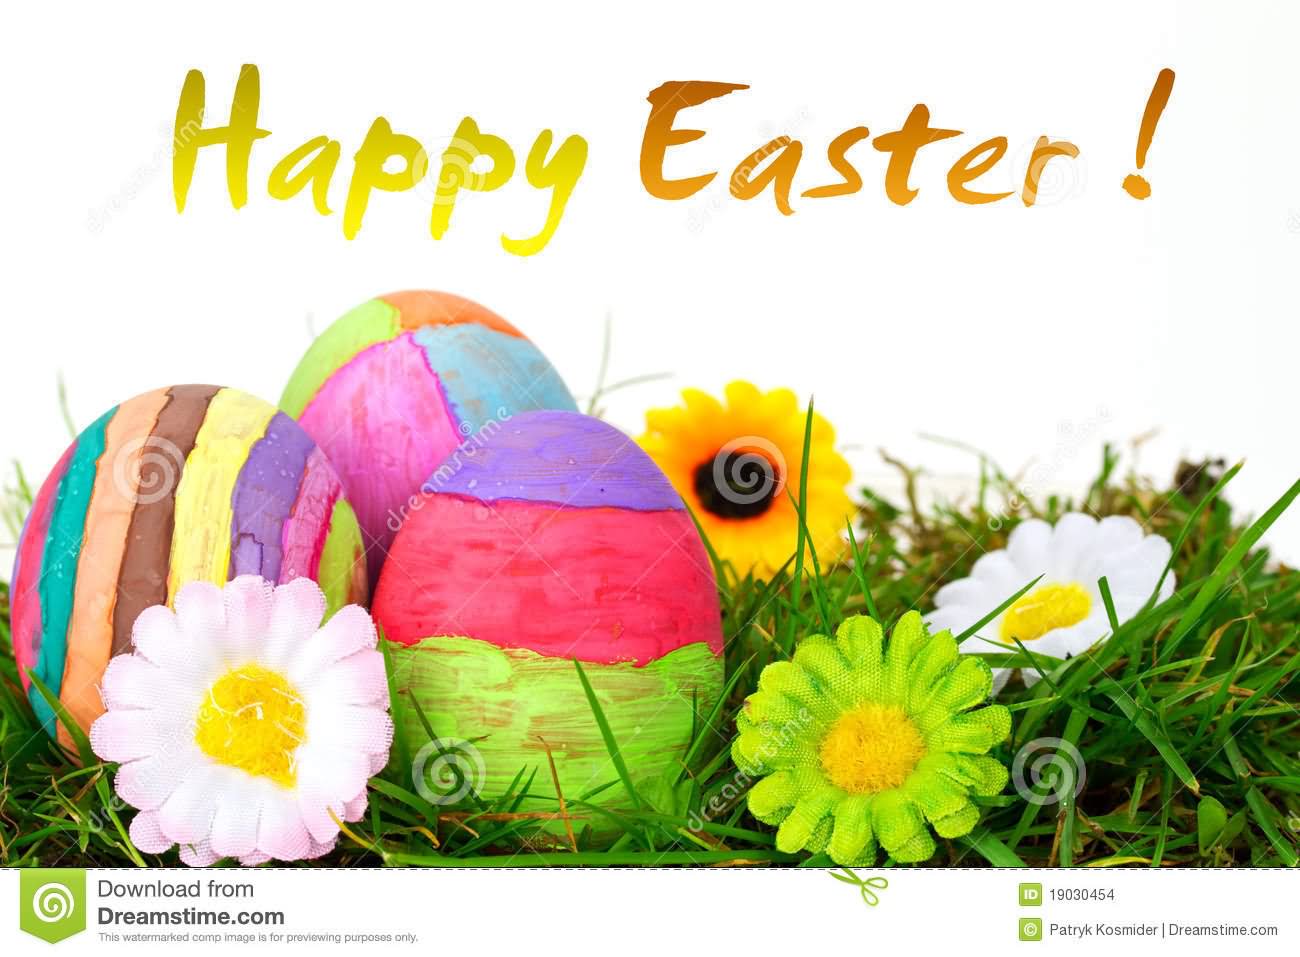 Wish You All Happy Easter